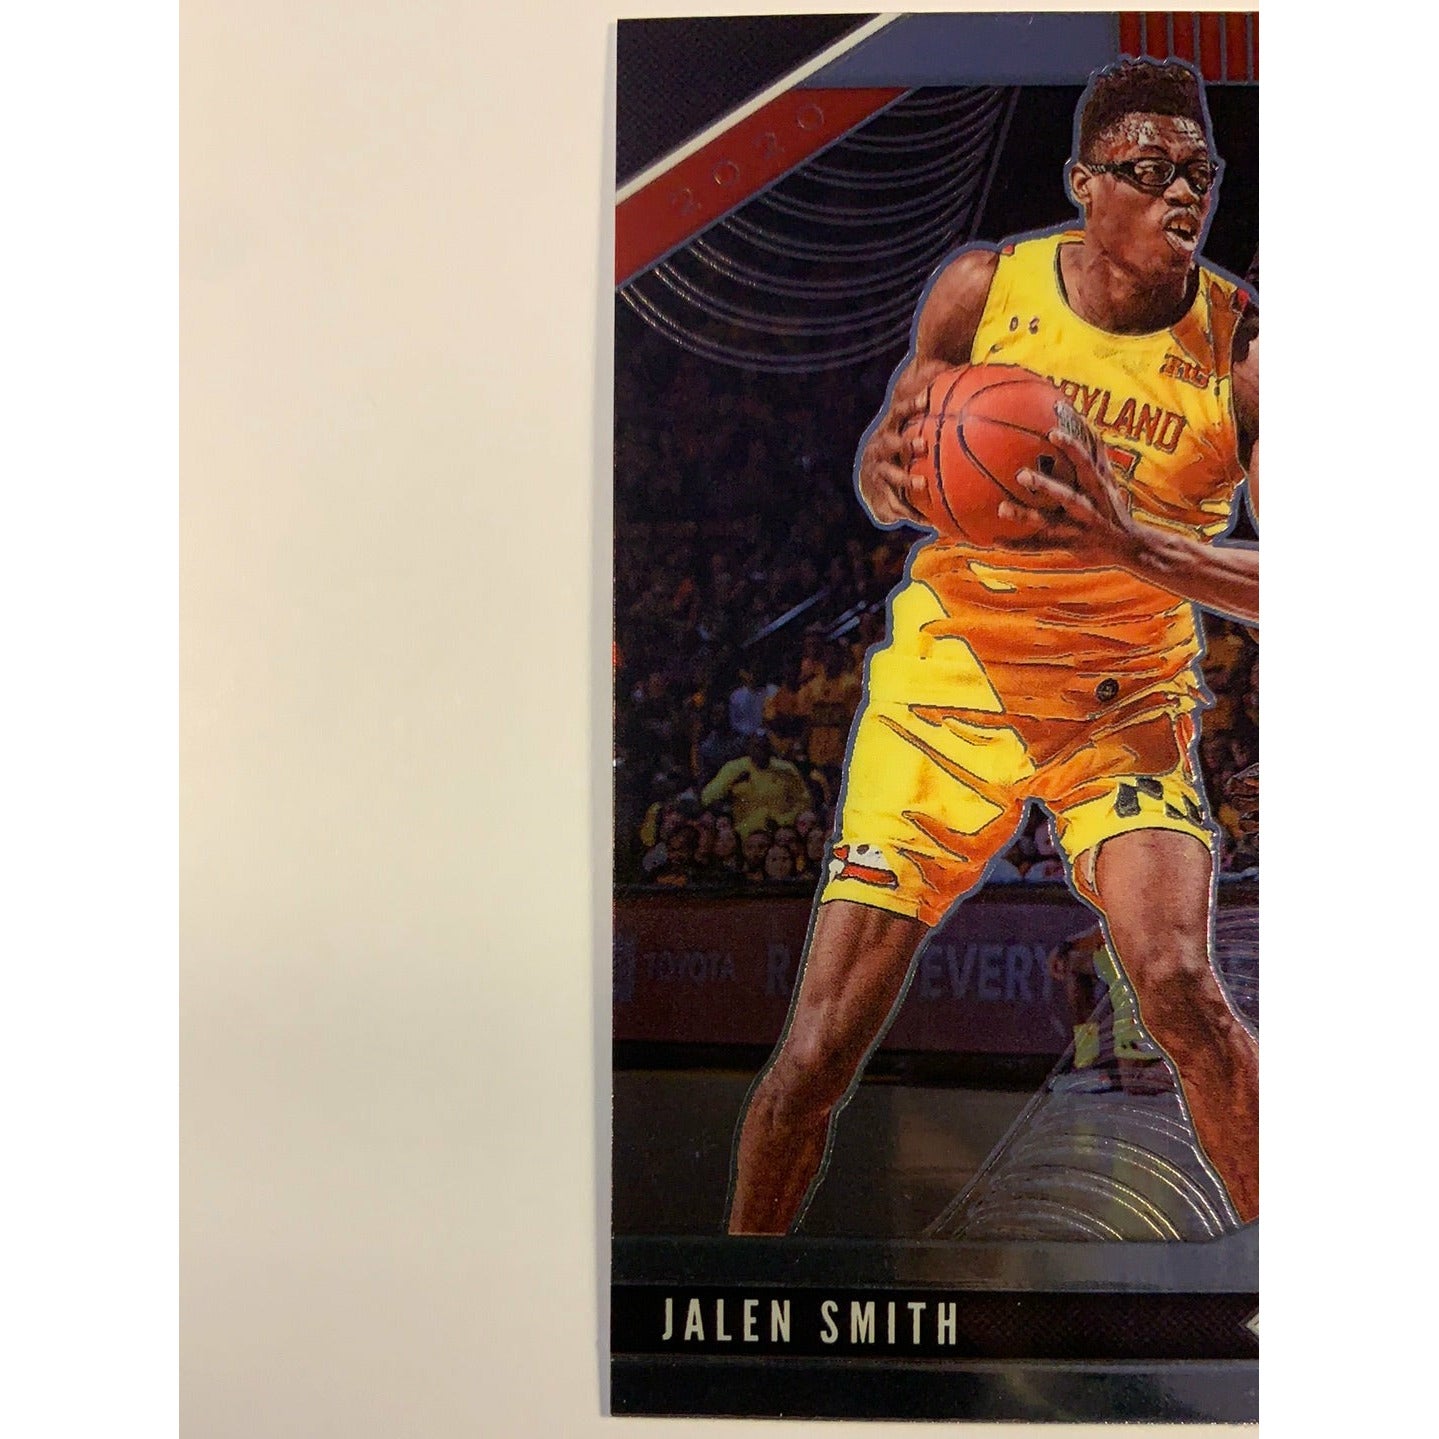  2020-21 Prizm Draft Picks Jalen Smith RC  Local Legends Cards & Collectibles